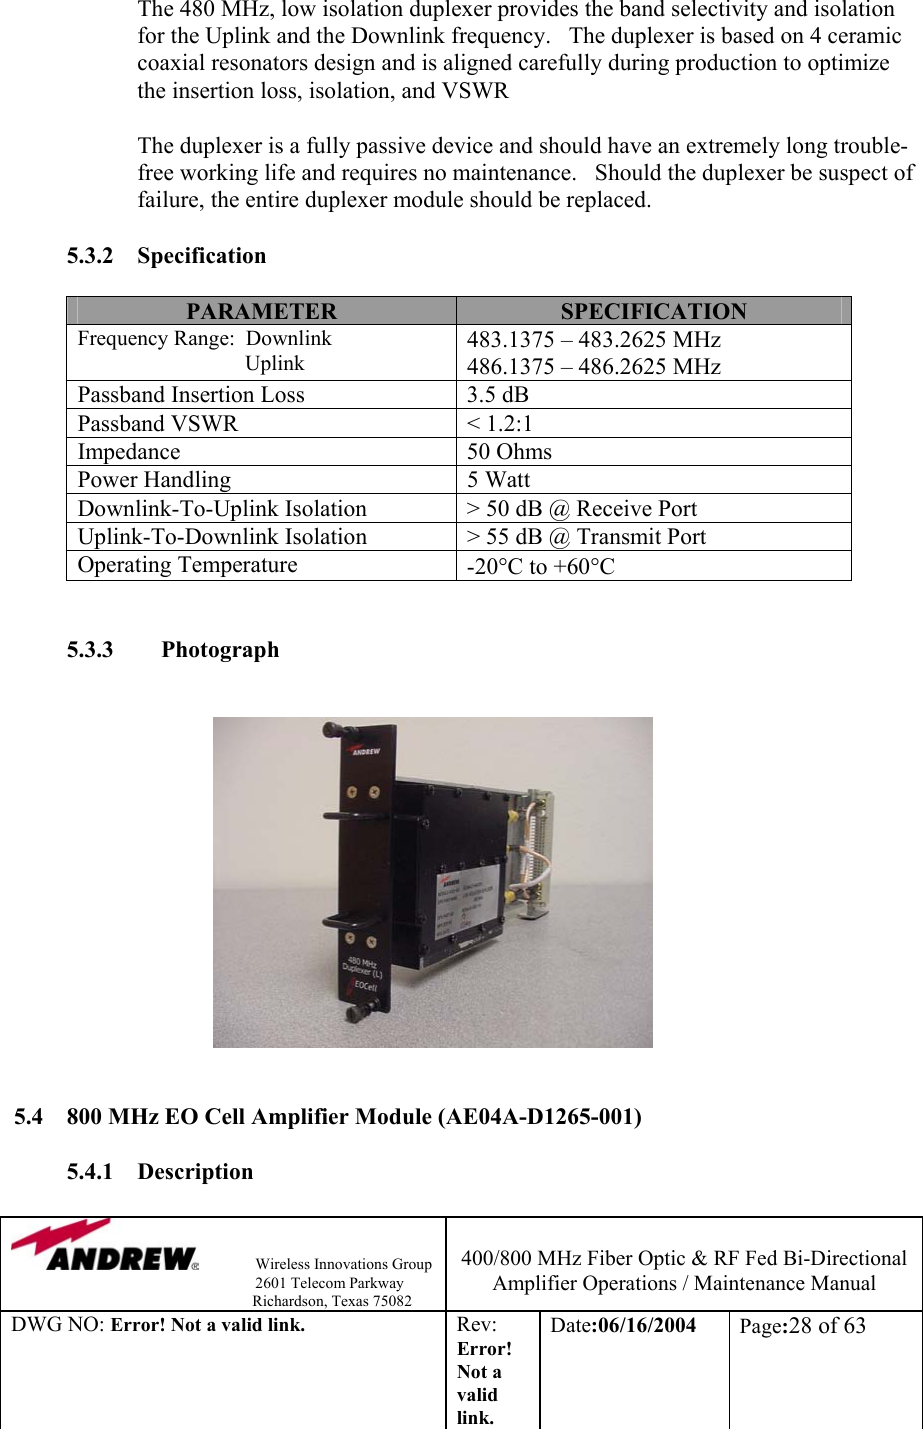                Wireless Innovations Group                                                                   2601 Telecom Parkway                                                         Richardson, Texas 75082  400/800 MHz Fiber Optic &amp; RF Fed Bi-Directional Amplifier Operations / Maintenance Manual DWG NO: Error! Not a valid link. Rev: Error! Not a valid link. Date:06/16/2004  Page:28 of 63  The 480 MHz, low isolation duplexer provides the band selectivity and isolation for the Uplink and the Downlink frequency.   The duplexer is based on 4 ceramic coaxial resonators design and is aligned carefully during production to optimize the insertion loss, isolation, and VSWR             The duplexer is a fully passive device and should have an extremely long trouble-free working life and requires no maintenance.   Should the duplexer be suspect of failure, the entire duplexer module should be replaced.    5.3.2 Specification  PARAMETER  SPECIFICATION Frequency Range:  Downlink                                Uplink 483.1375 – 483.2625 MHz 486.1375 – 486.2625 MHz Passband Insertion Loss  3.5 dB Passband VSWR  &lt; 1.2:1 Impedance 50 Ohms Power Handling  5 Watt Downlink-To-Uplink Isolation  &gt; 50 dB @ Receive Port  Uplink-To-Downlink Isolation  &gt; 55 dB @ Transmit Port Operating Temperature  -20°C to +60°C   5.3.3        Photograph                                            5.4  800 MHz EO Cell Amplifier Module (AE04A-D1265-001)  5.4.1 Description  